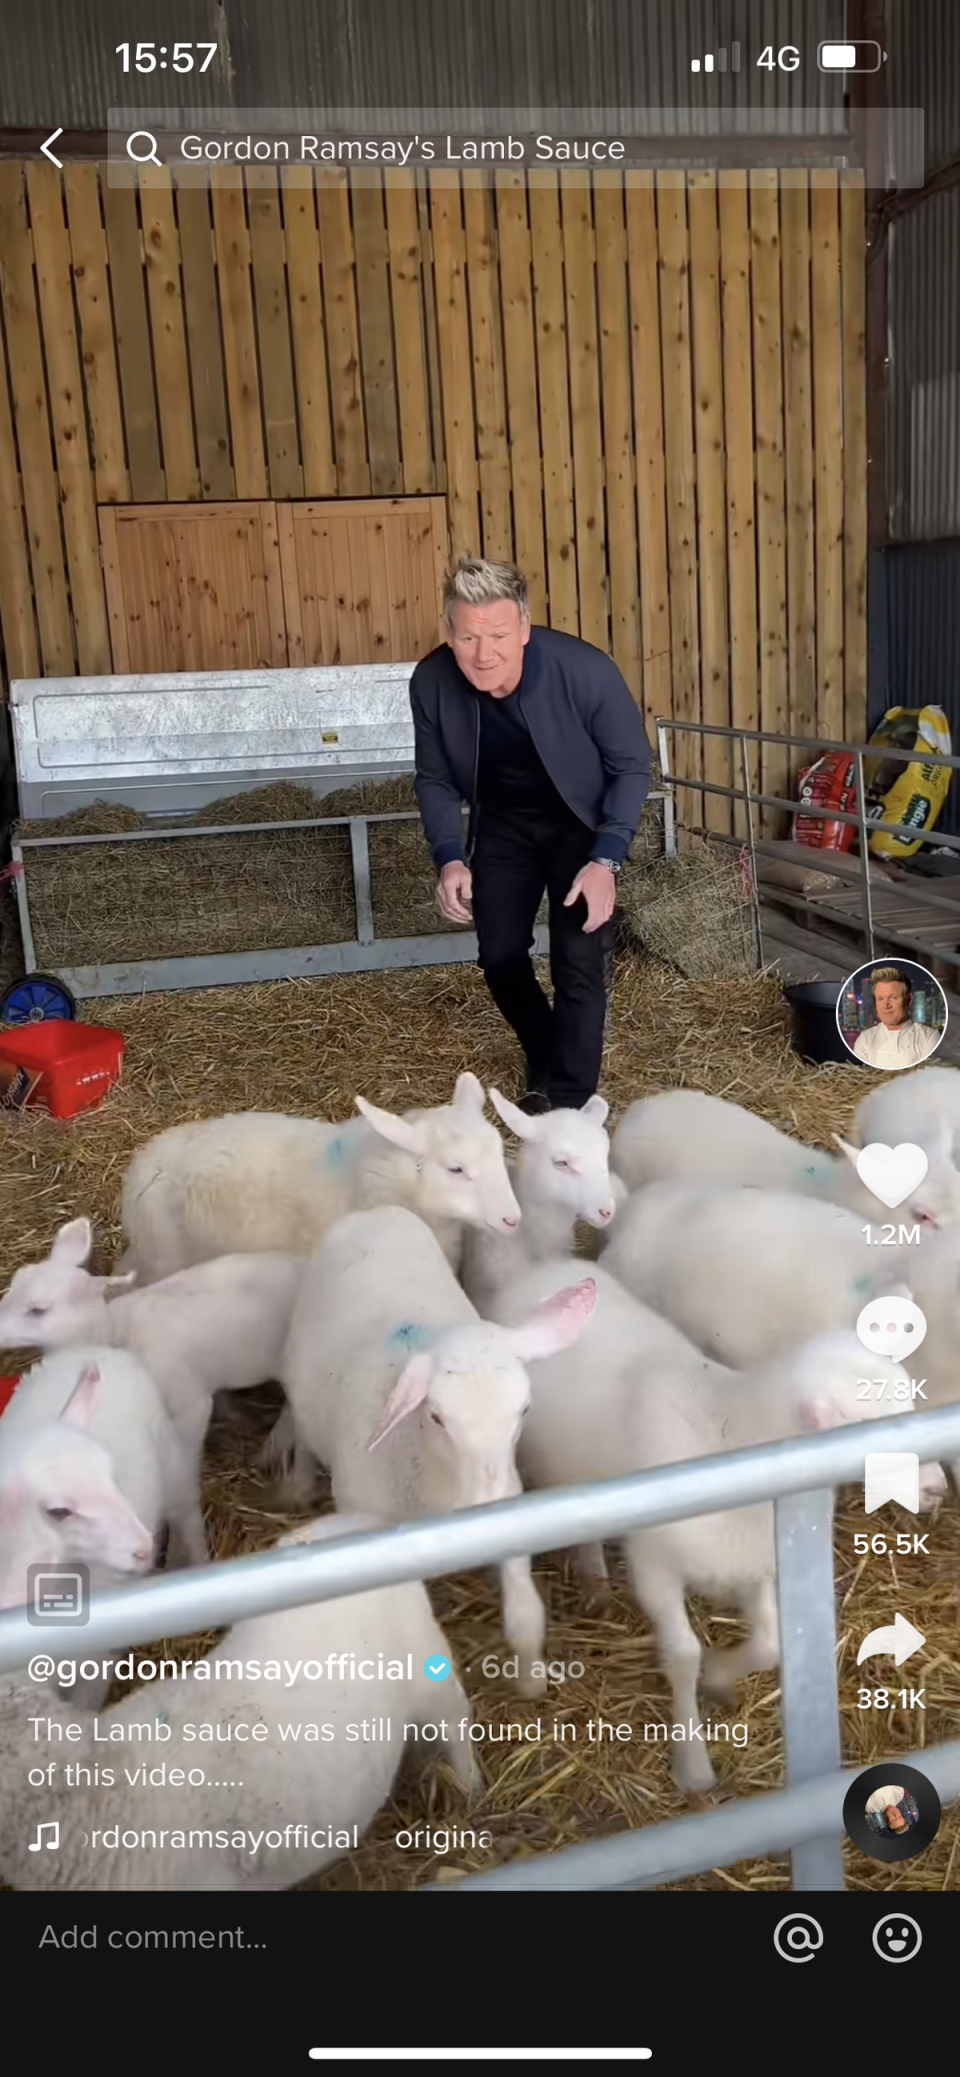 The celebrity chef also faced backlash recently after jumping into a lamb enclosure and asking which of the flock was ‘ going in the oven first?’ (TikTok/ Gordon Ramsay)